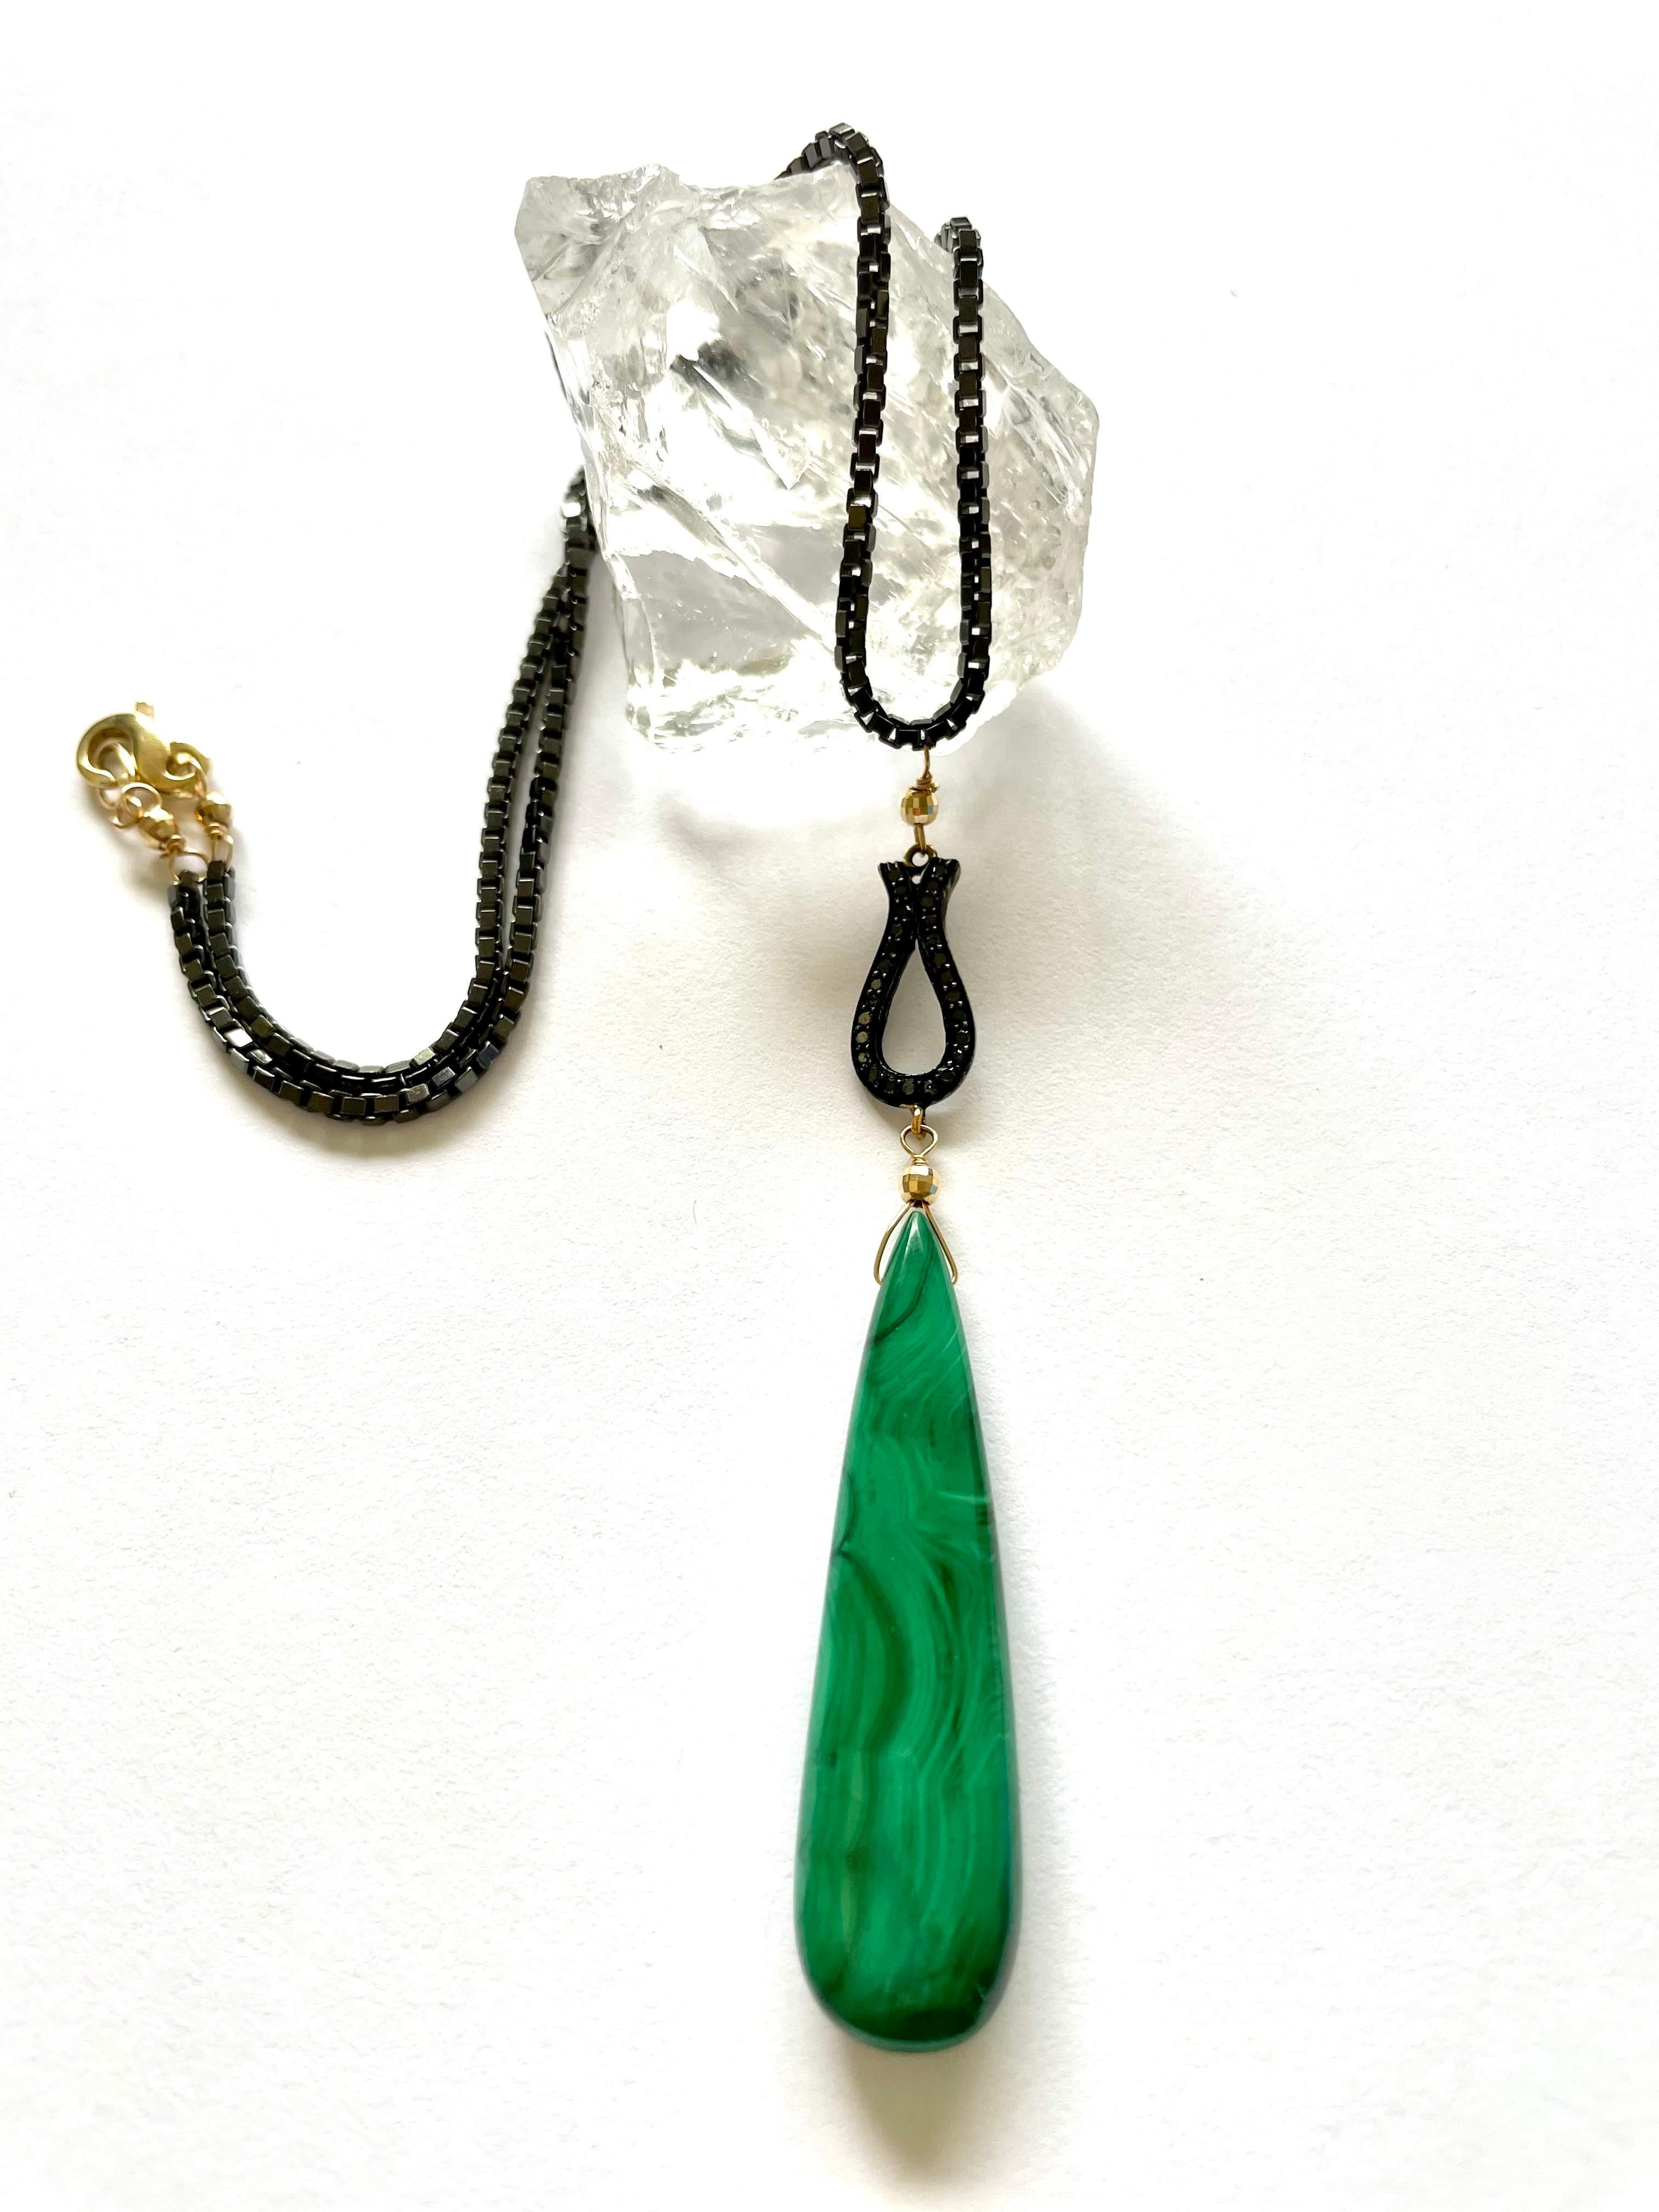 Description
Casual and striking Malachite with black pave diamonds and black chain necklace highlighted with 14k yellow gold accents.  
Item # N3696

Materials and Weight
Malachite, 13 x 50mm, elongated drop shape, 42 carats.
Black pave diamonds.